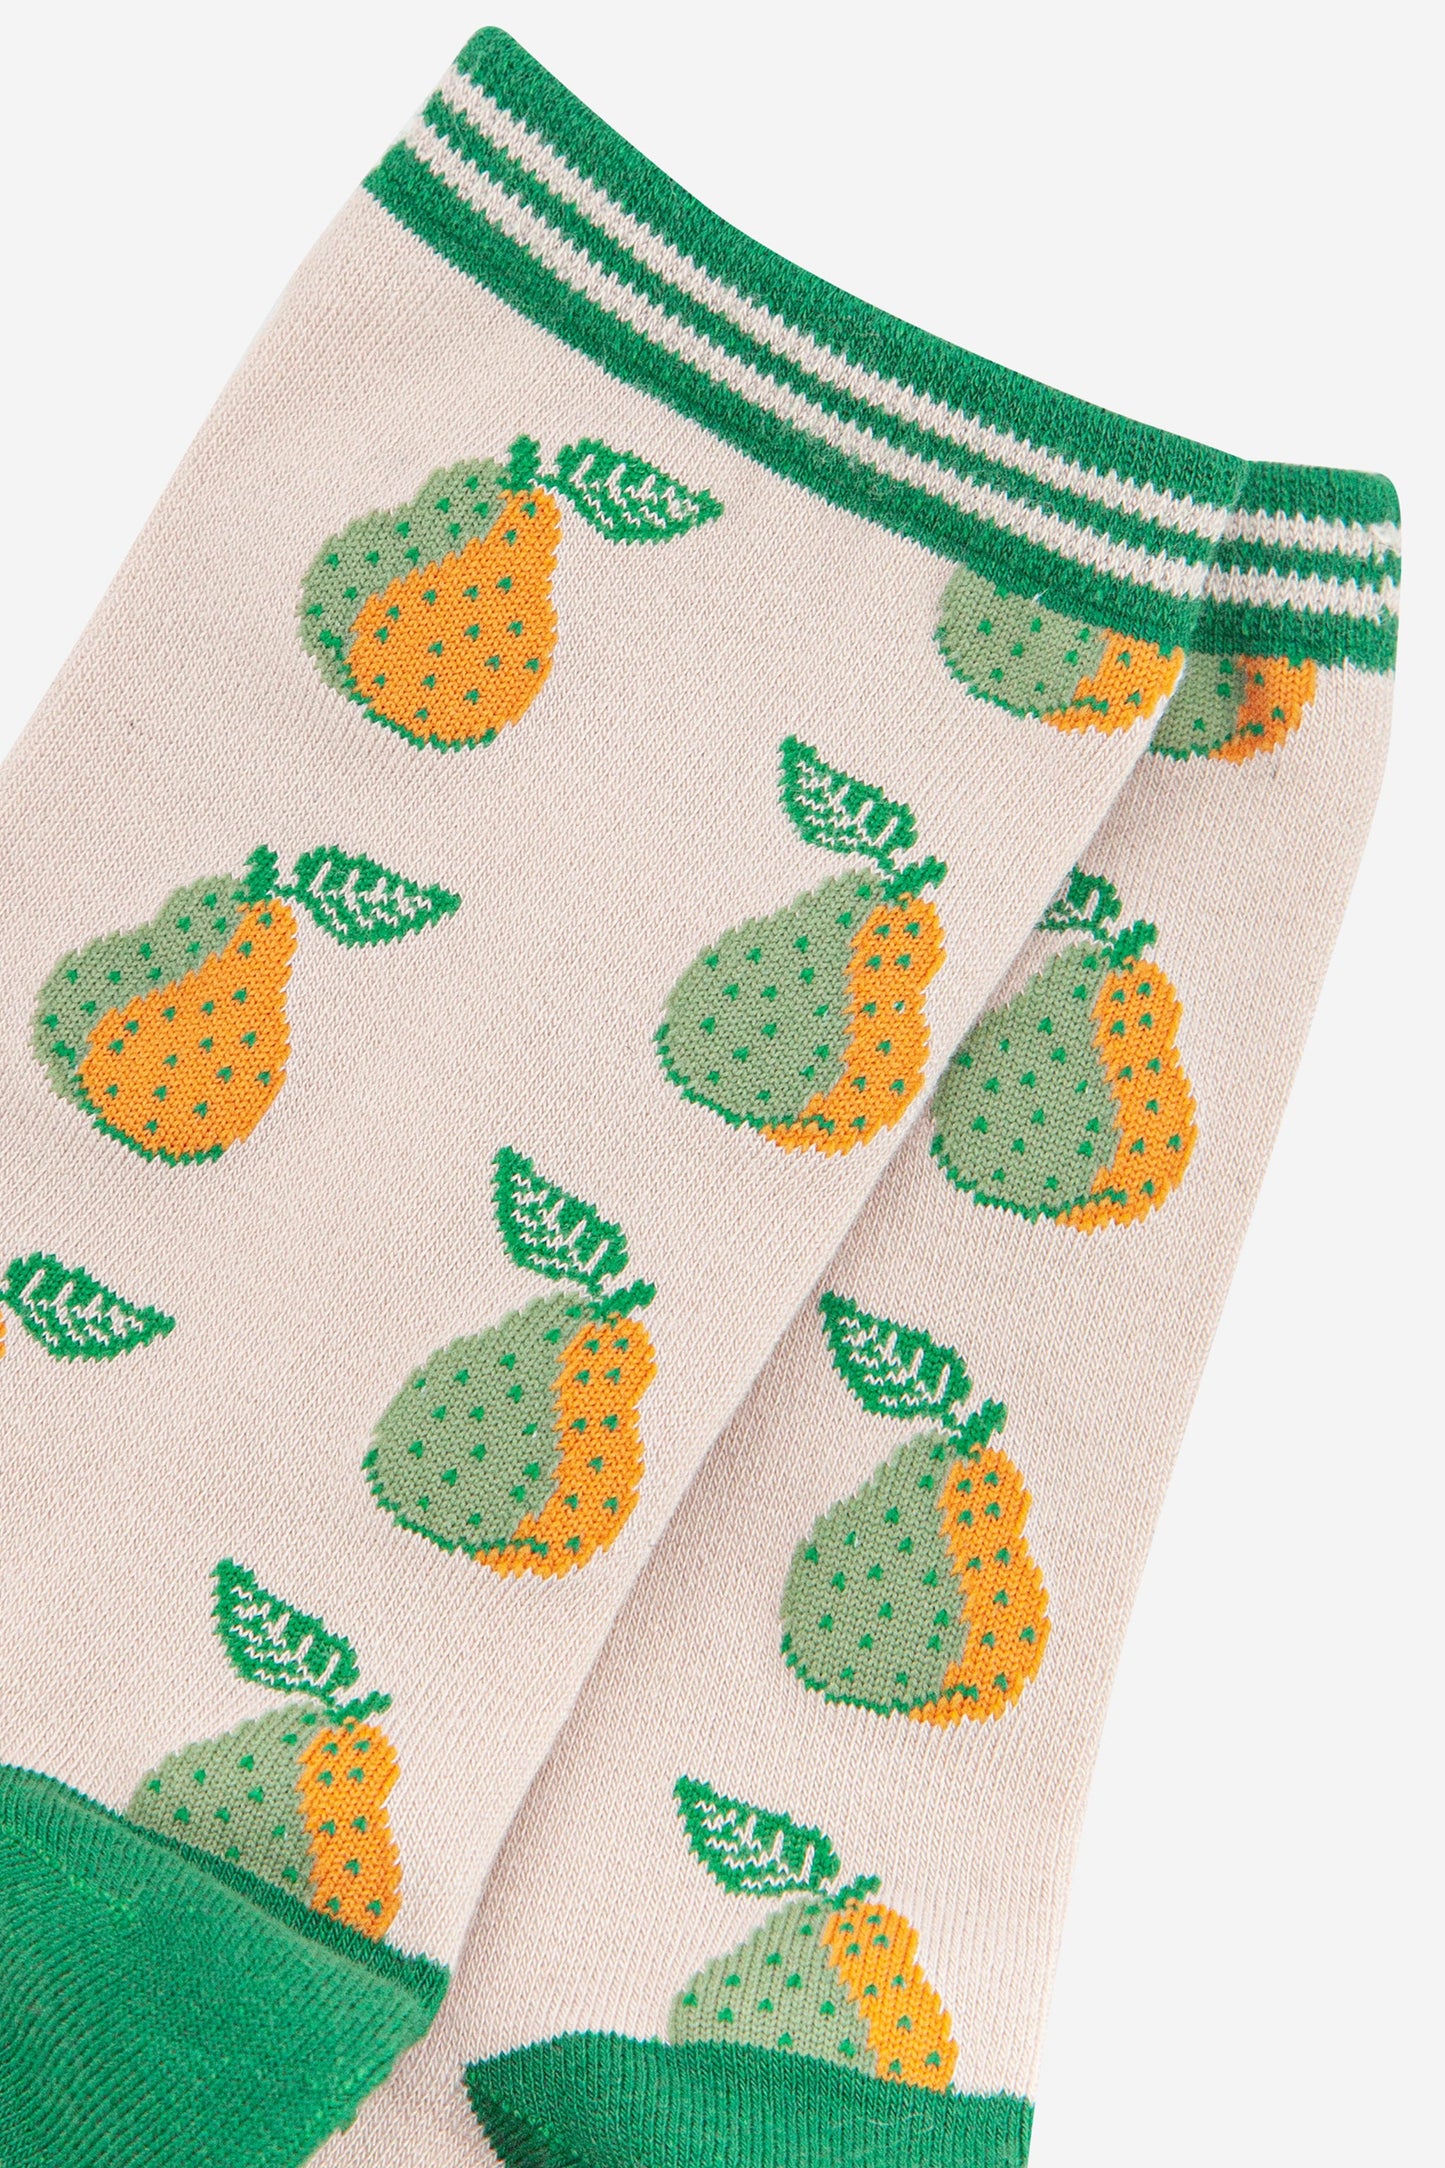 close up of the green and yellow pear fruit print  and striped cuff on the bamboo socks